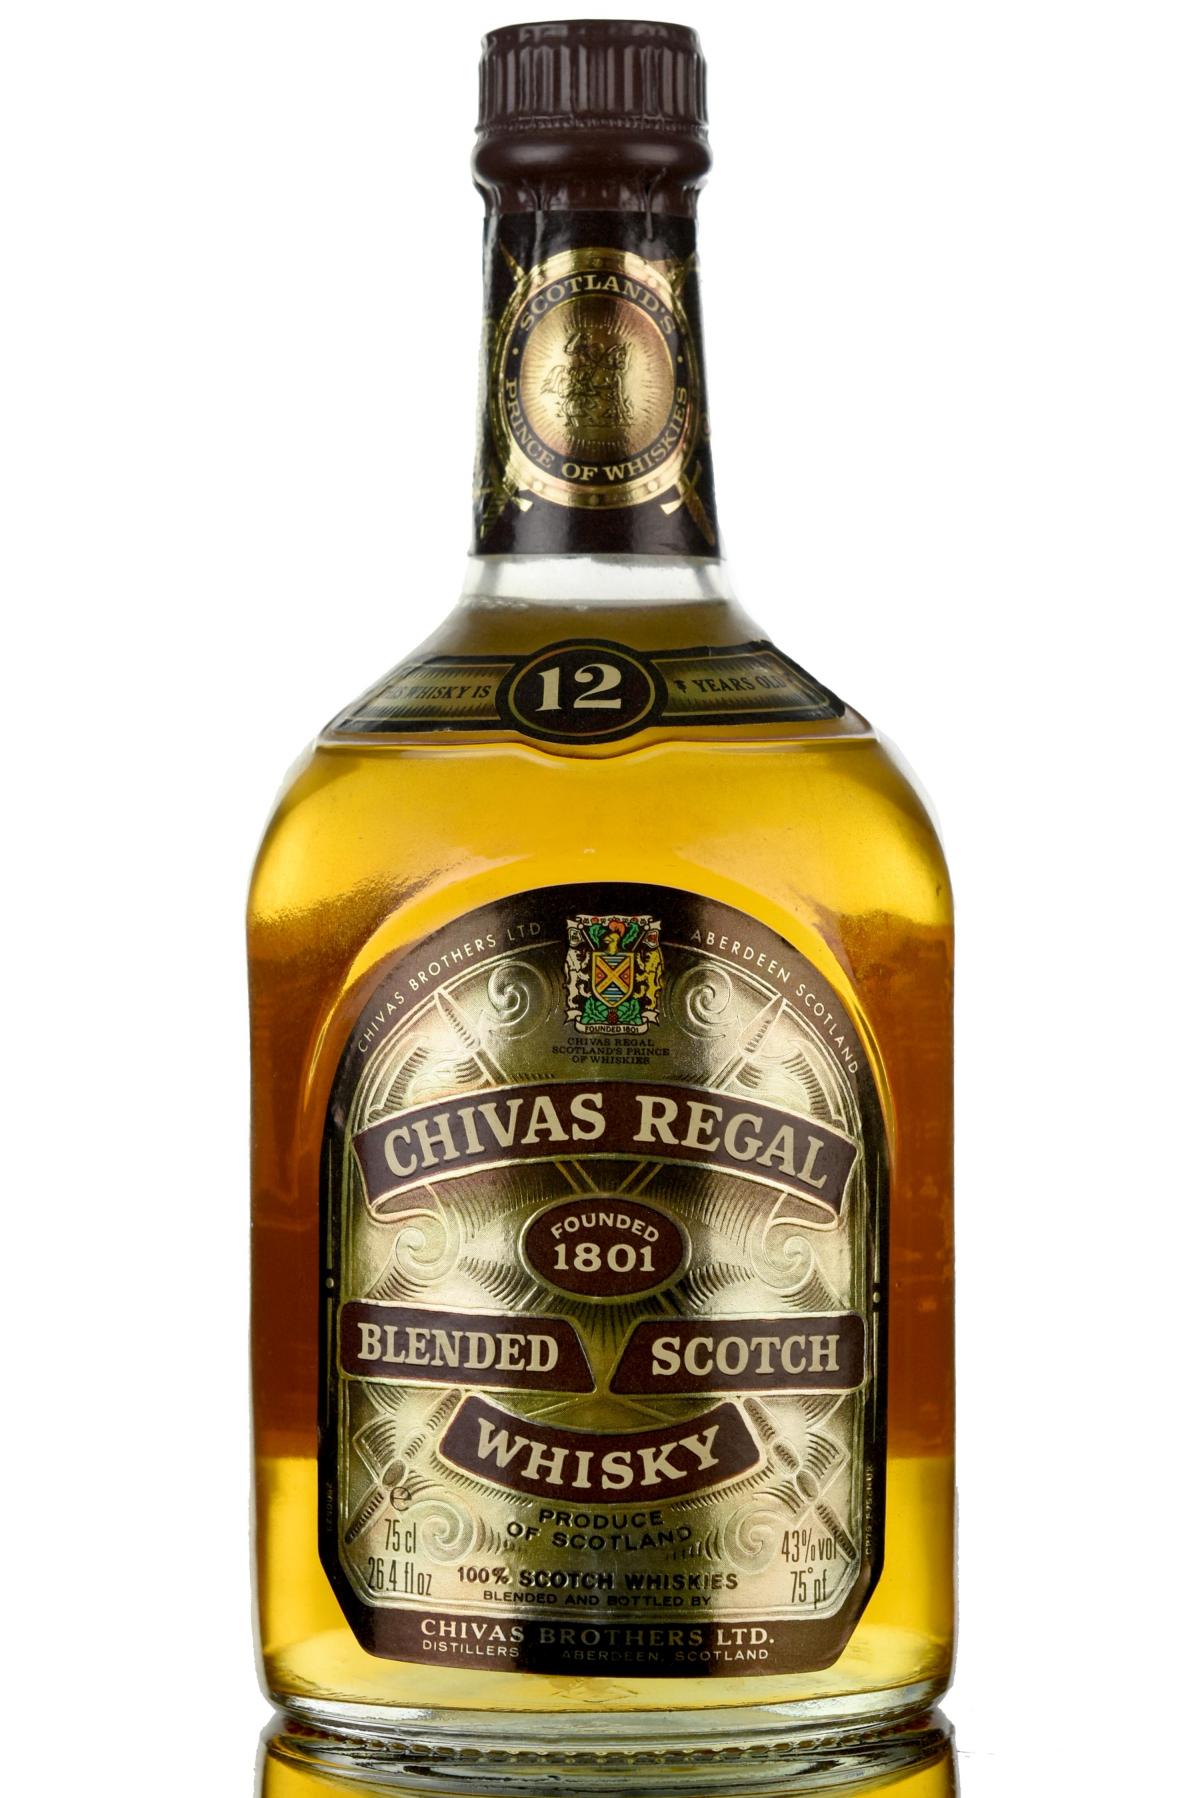 Chivas Regal 12 Year Old - Late 1970s